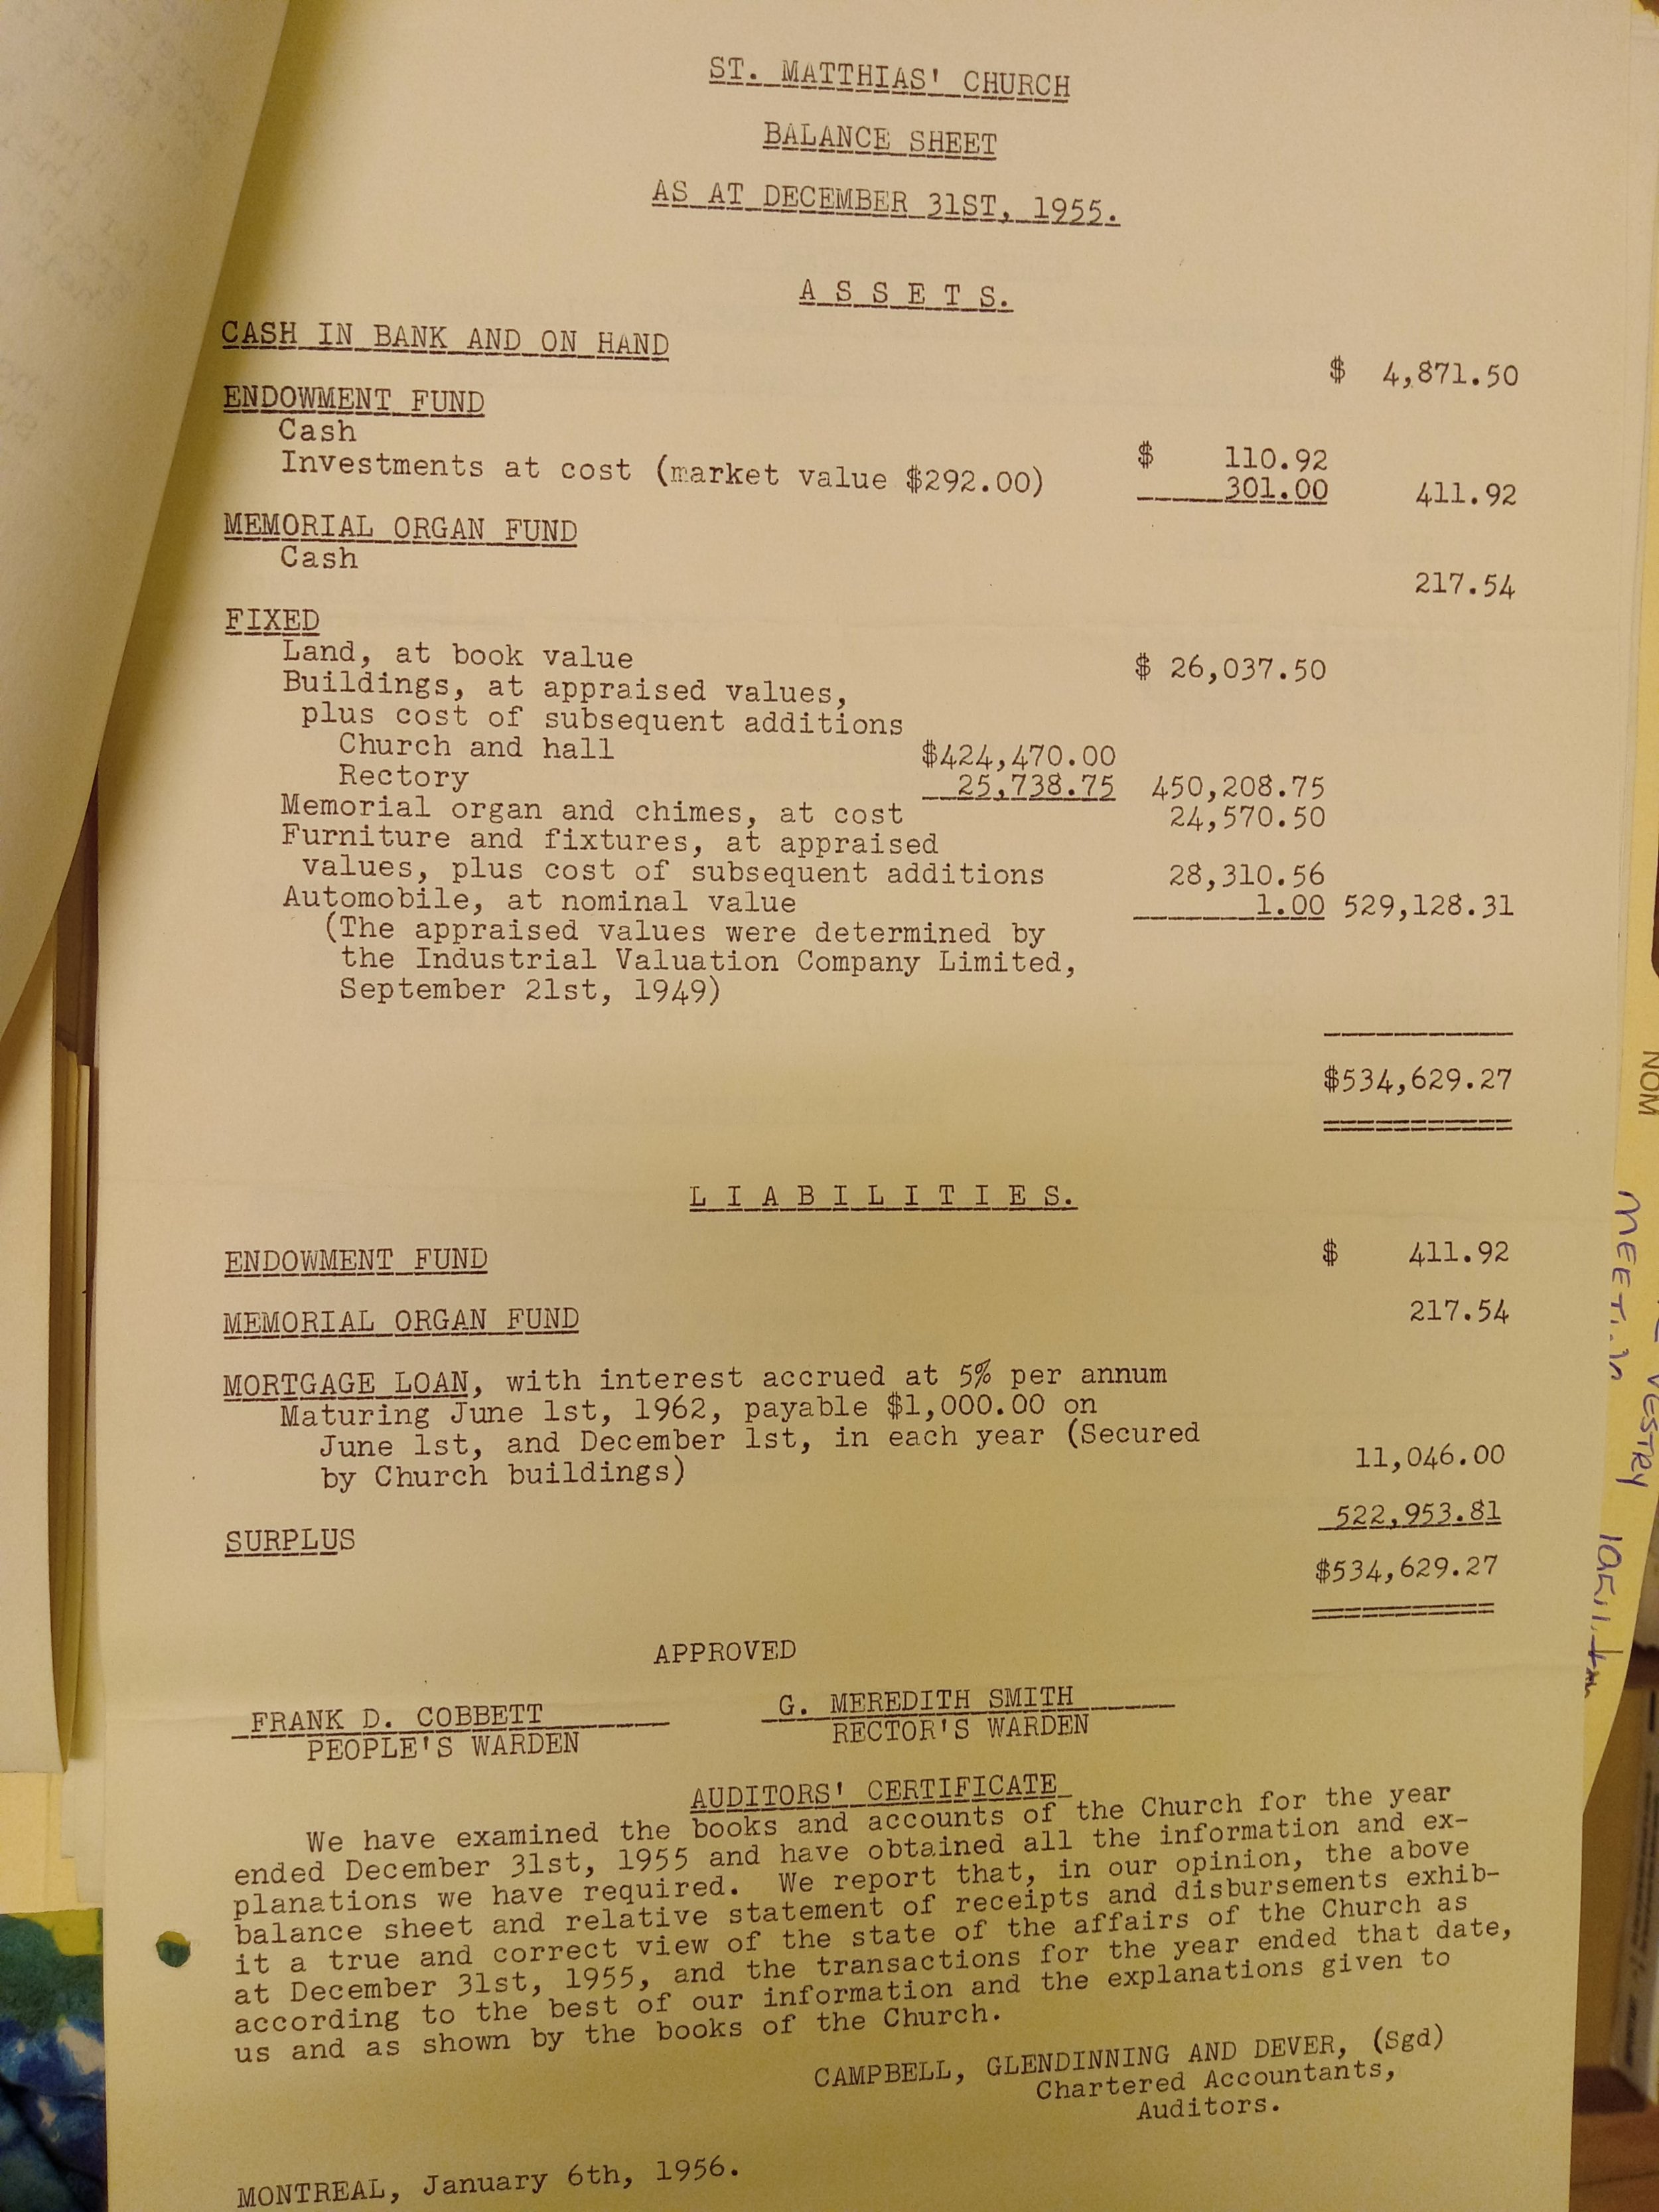 1955 Asets and LIabilities.jpg